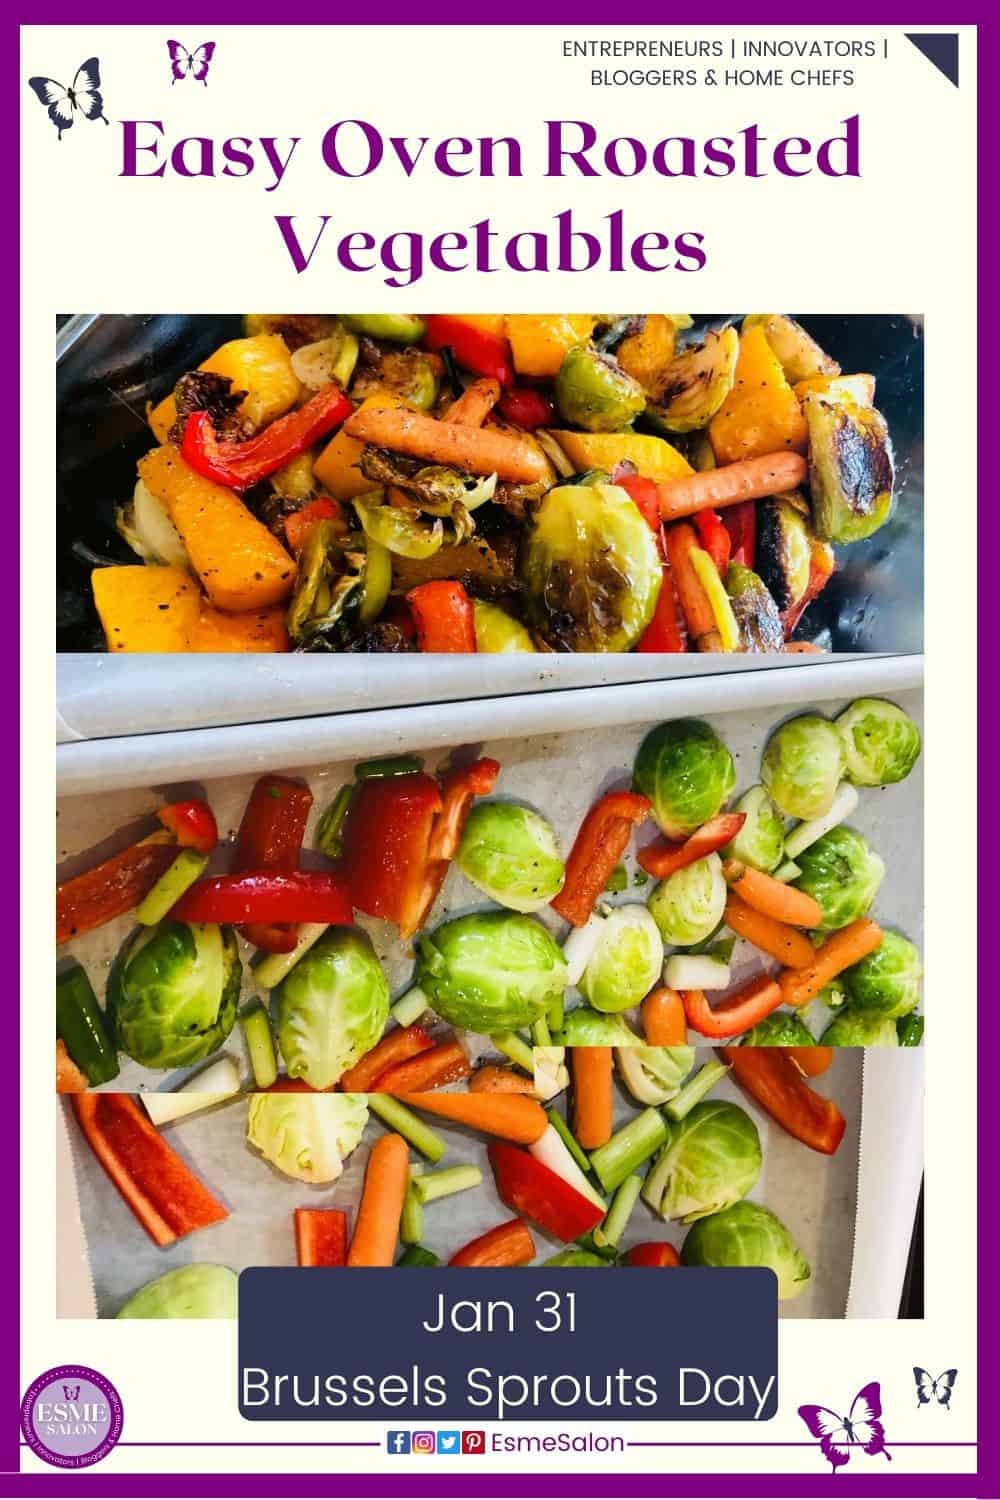 an image of fresh cut veggies for an Easy Oven Roasted Vegetables dish